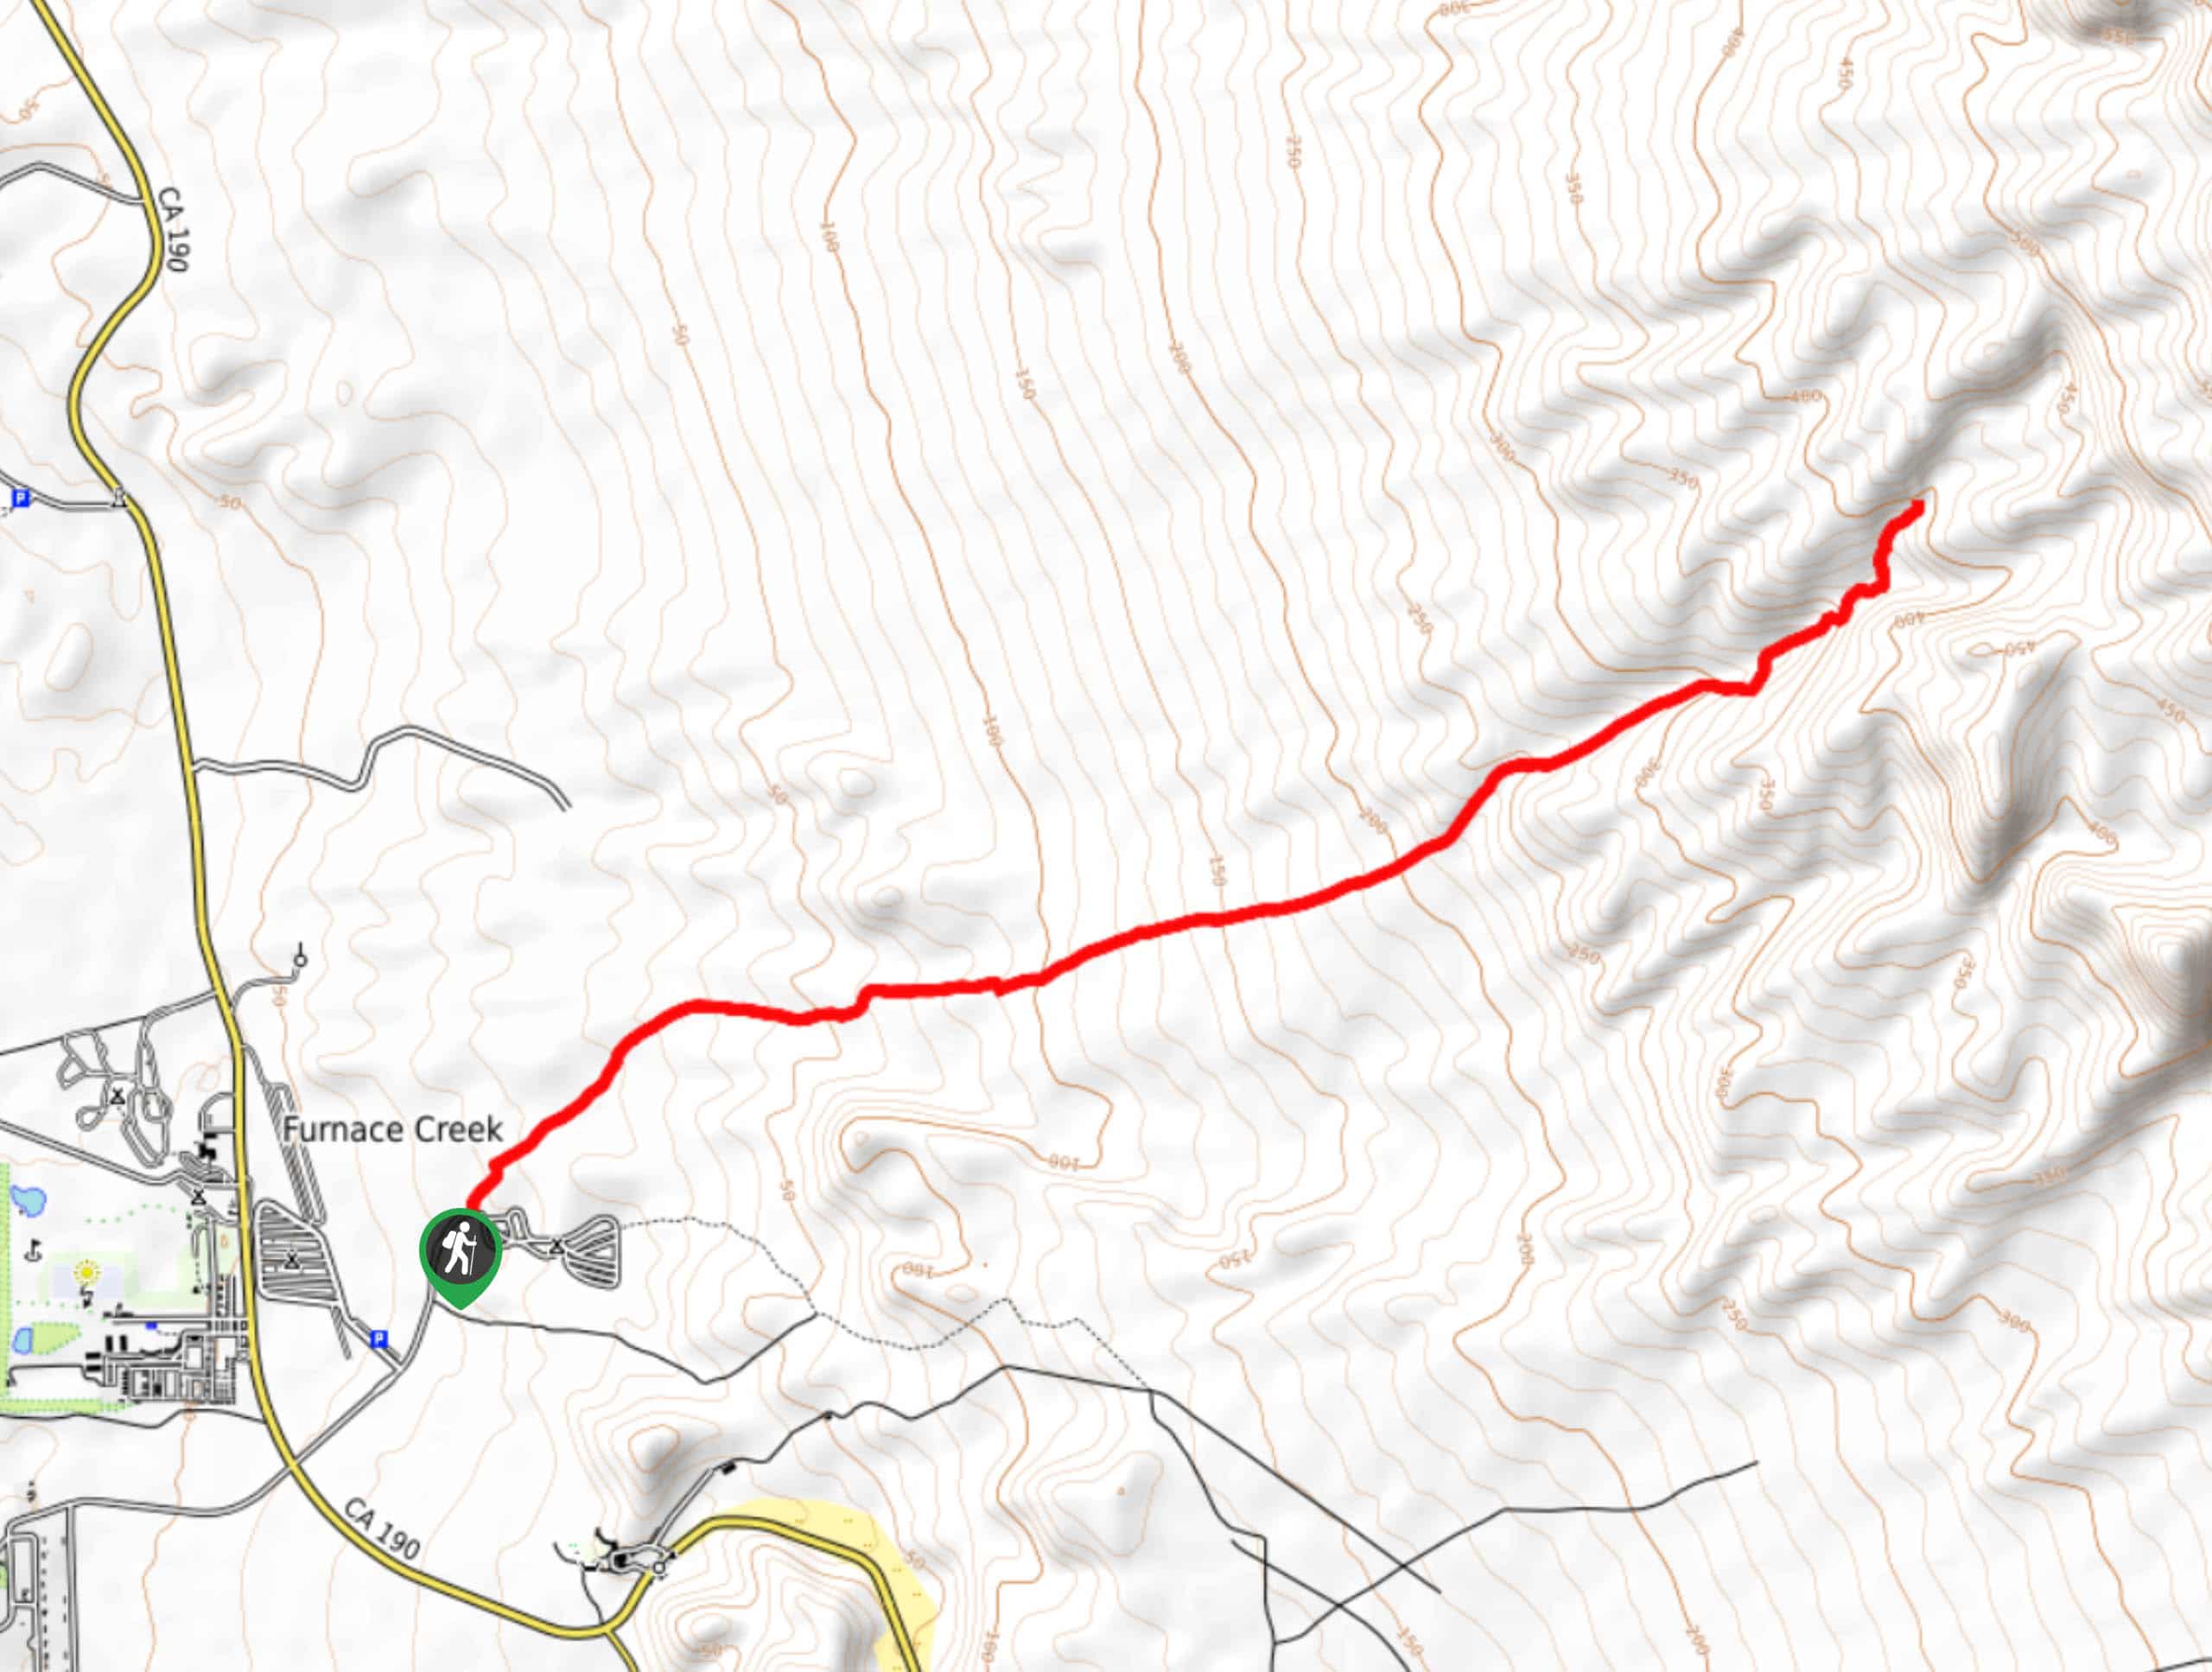 Funeral Canyon Trail Map